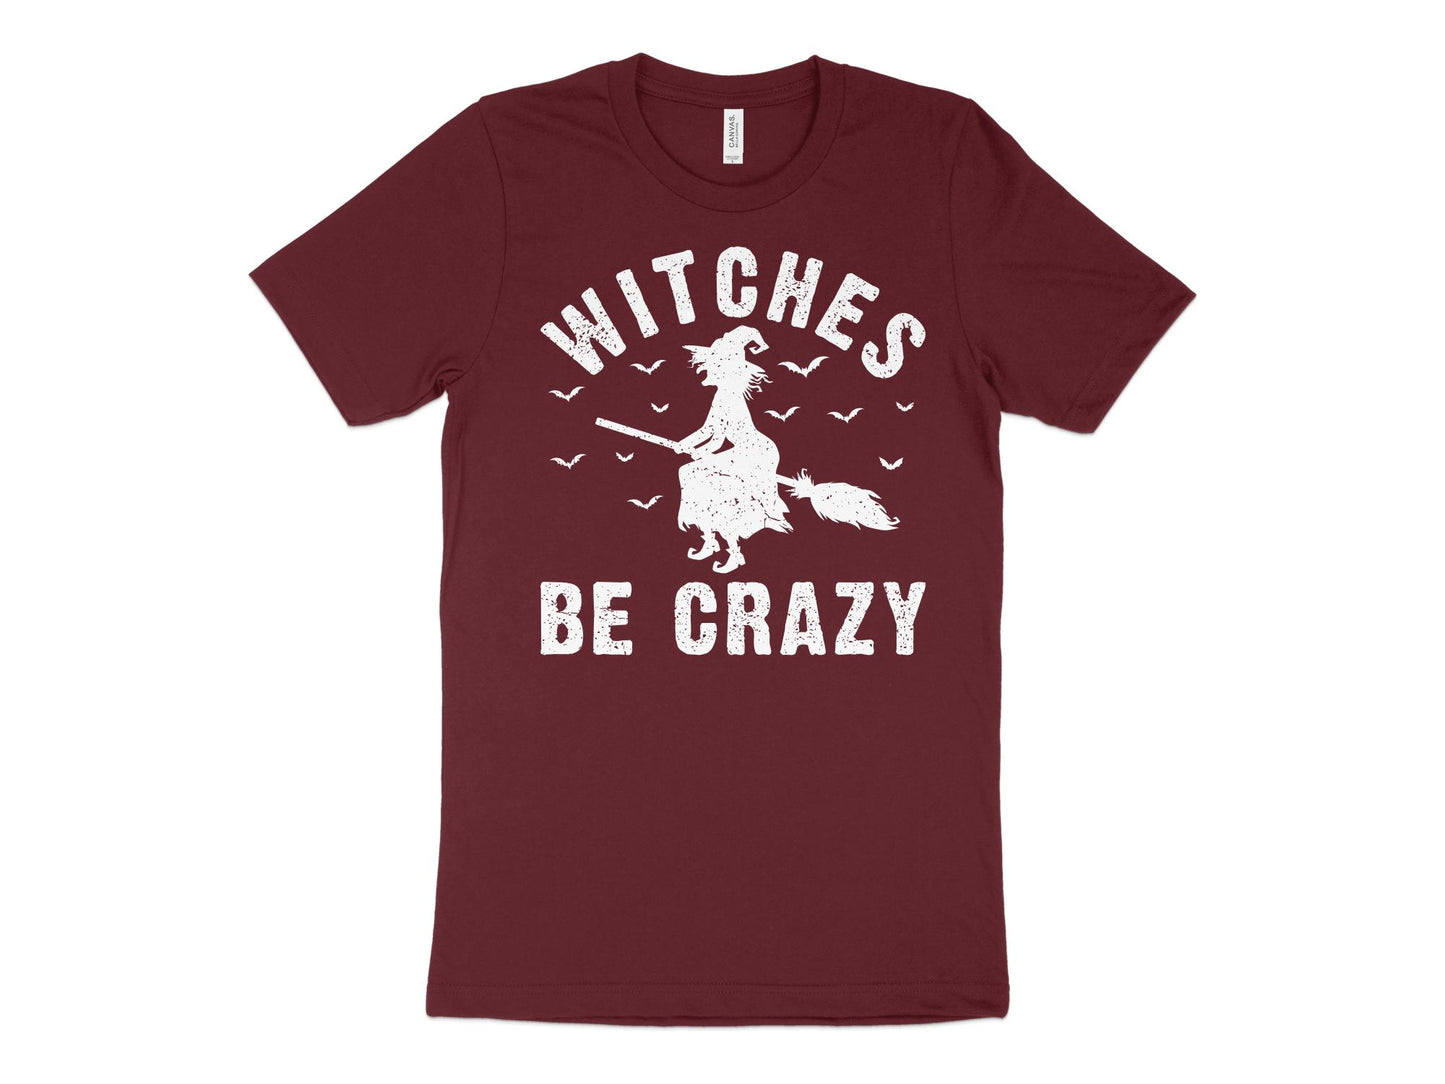 Witches Be Crazy Shirt, maroon